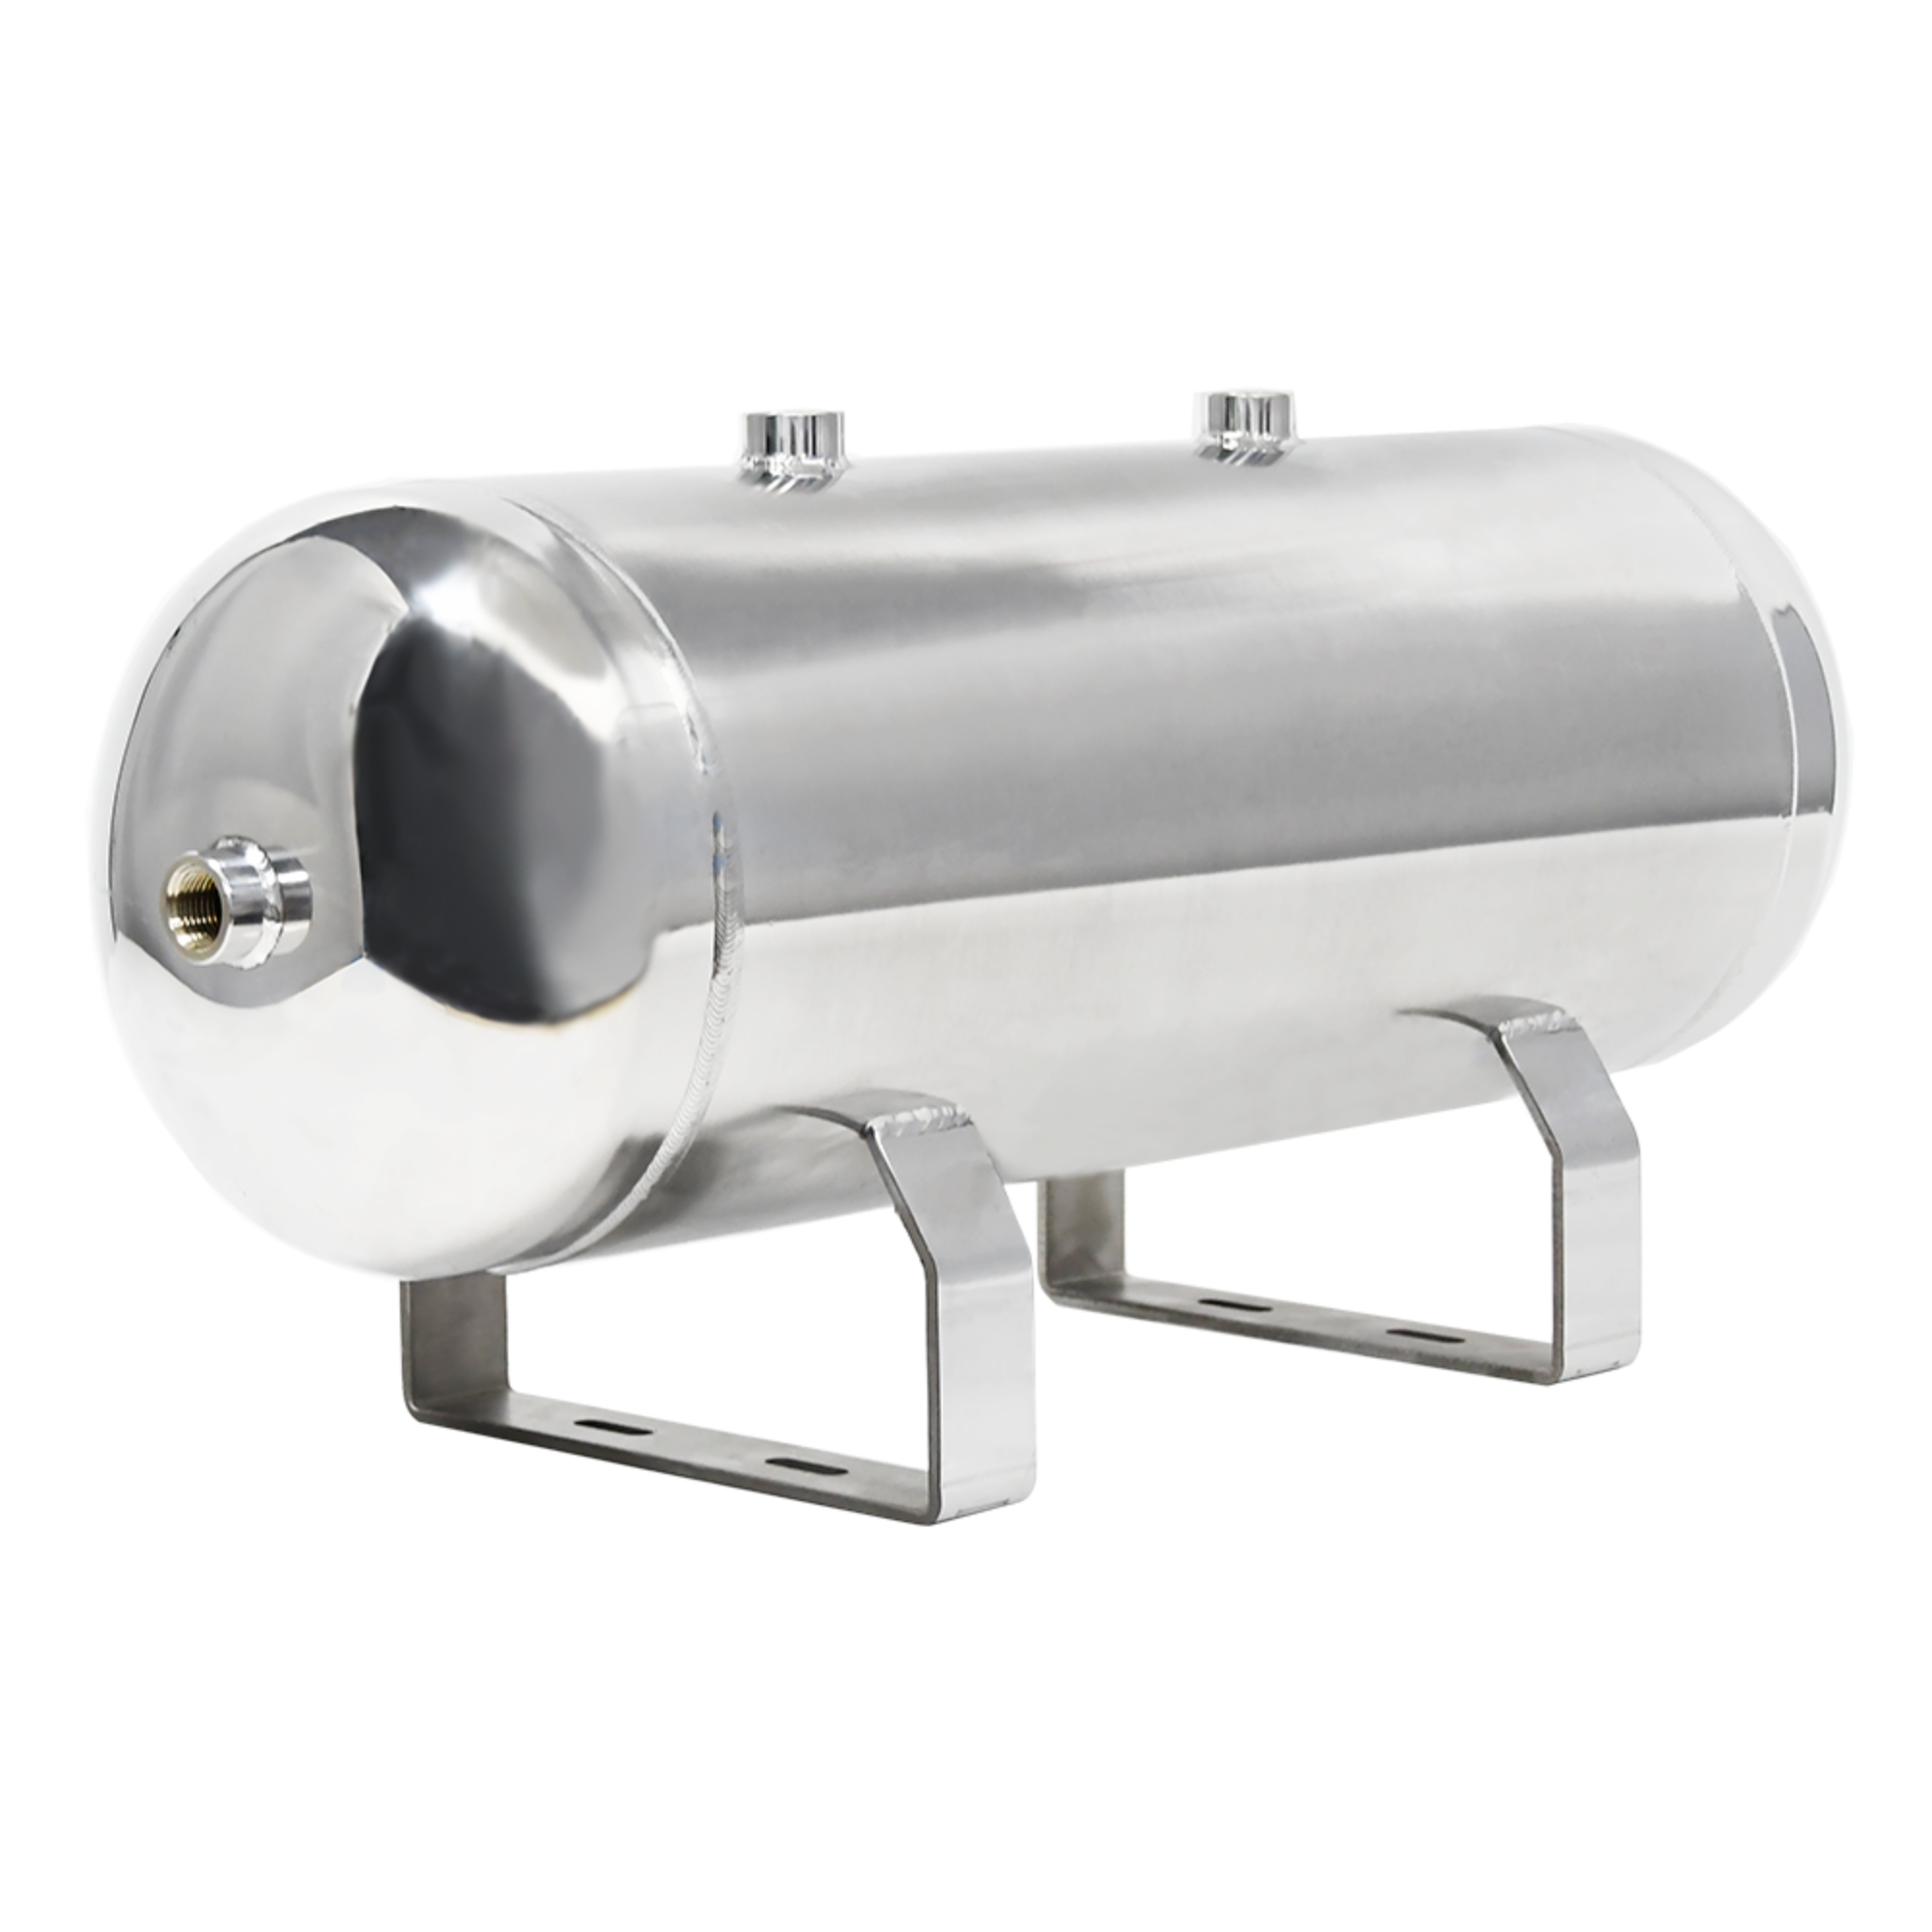 YC-20L-HEAVY PRESSURE-SSH Portable Stainless Steel Compressed Air Storage Tank